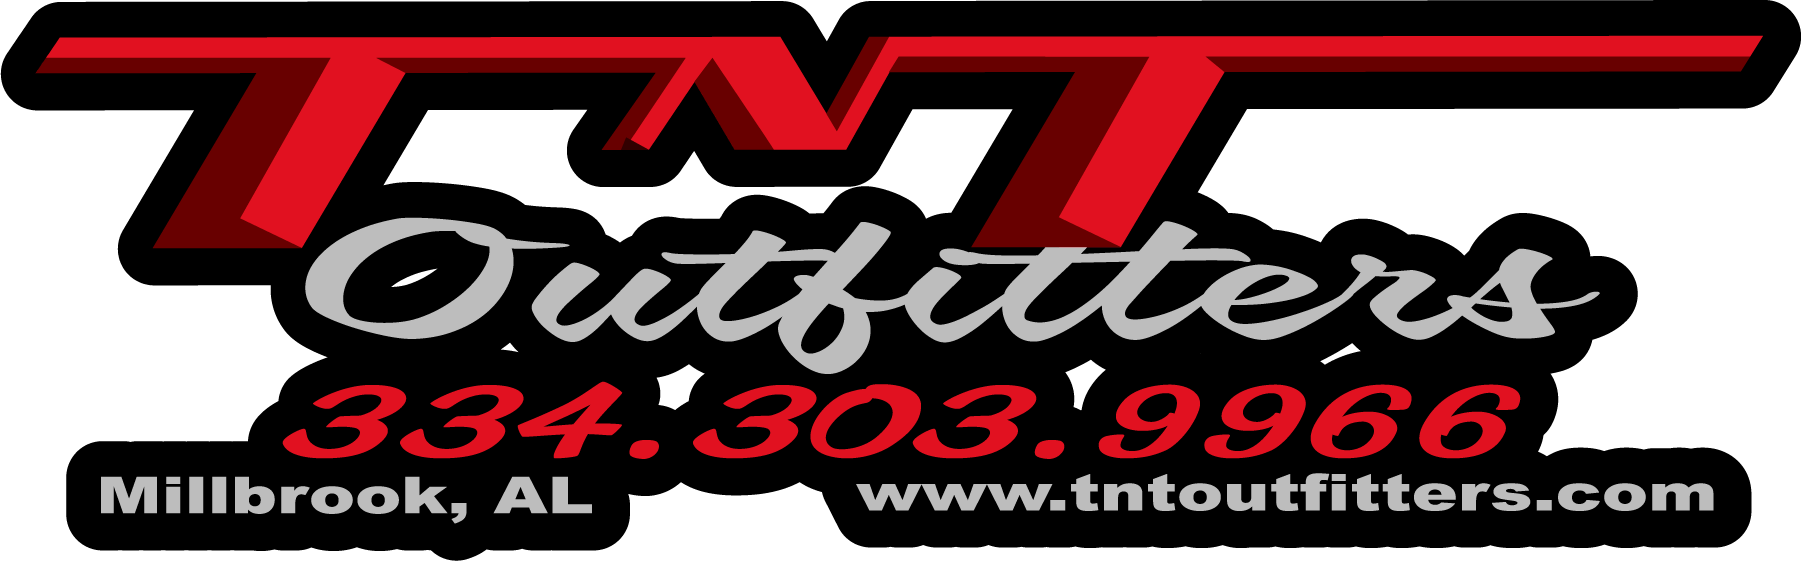 TNT Outfitters Footer Logo